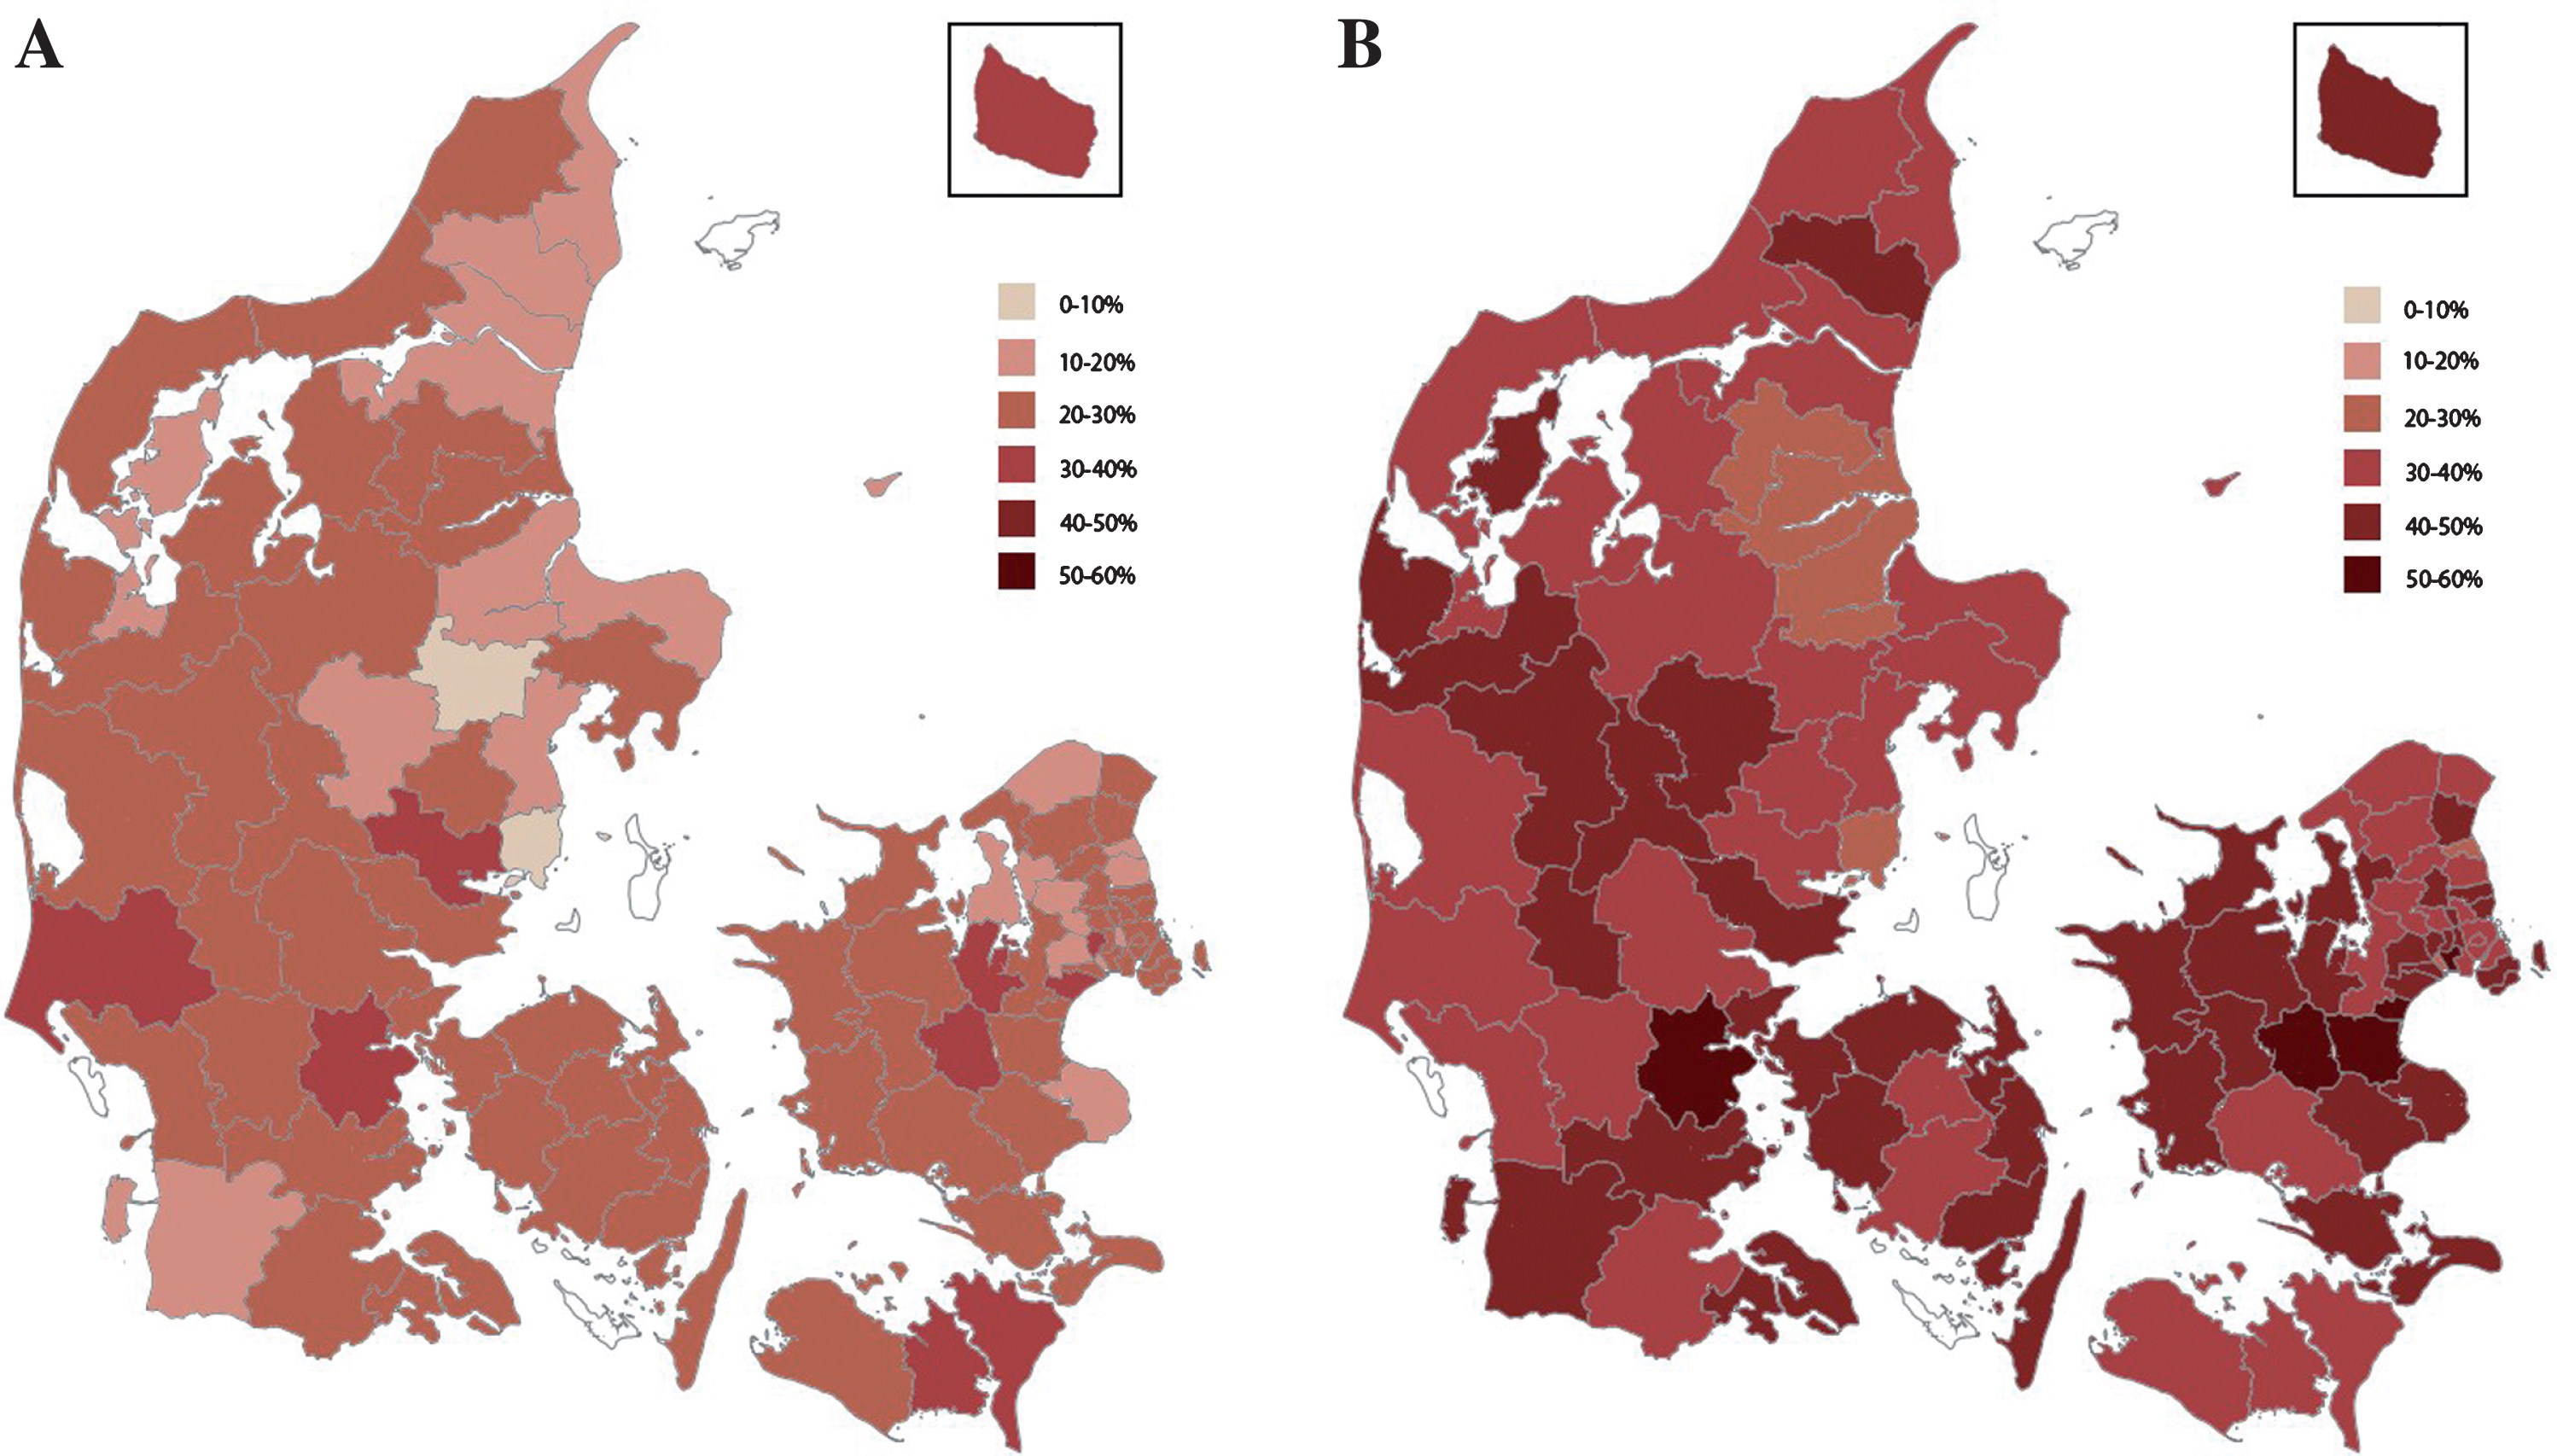 A) Age and sex standardized prevalence of opioid use among home-living patients with dementia across the Danish municipalities. White indicates exclusion due to insufficient data. B) Age and sex standardized prevalence of opioid use among nursing home residents with dementia across the Danish municipalities. White indicates exclusion due to insufficient data.